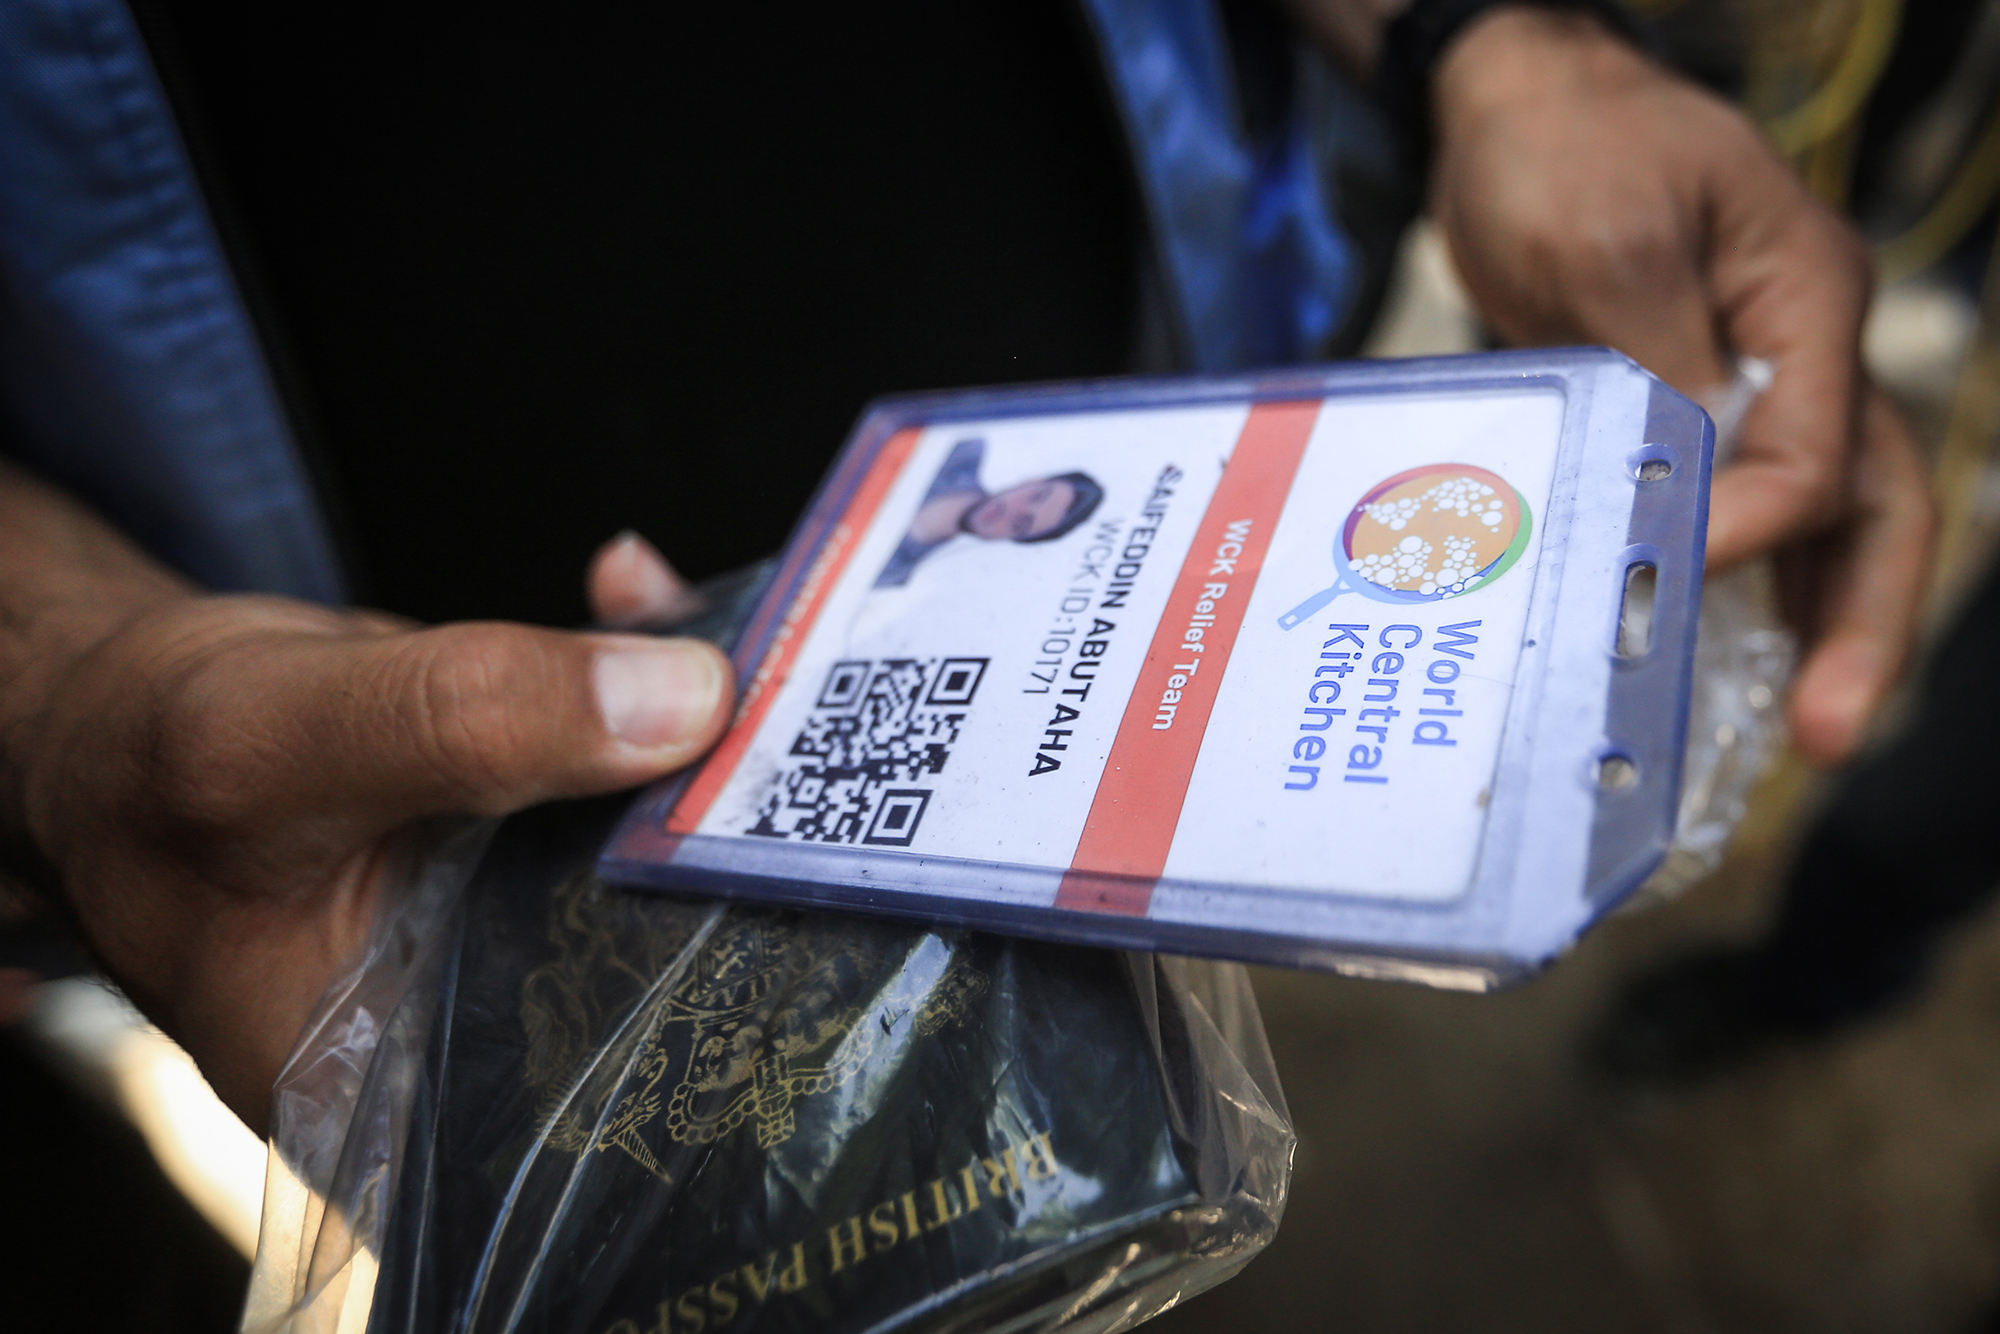 A person in Rafah, Gaza, on April 3 carries the credentials of a member of the World Central Kitchen aid group, who was killed in an Israeli airstrike.